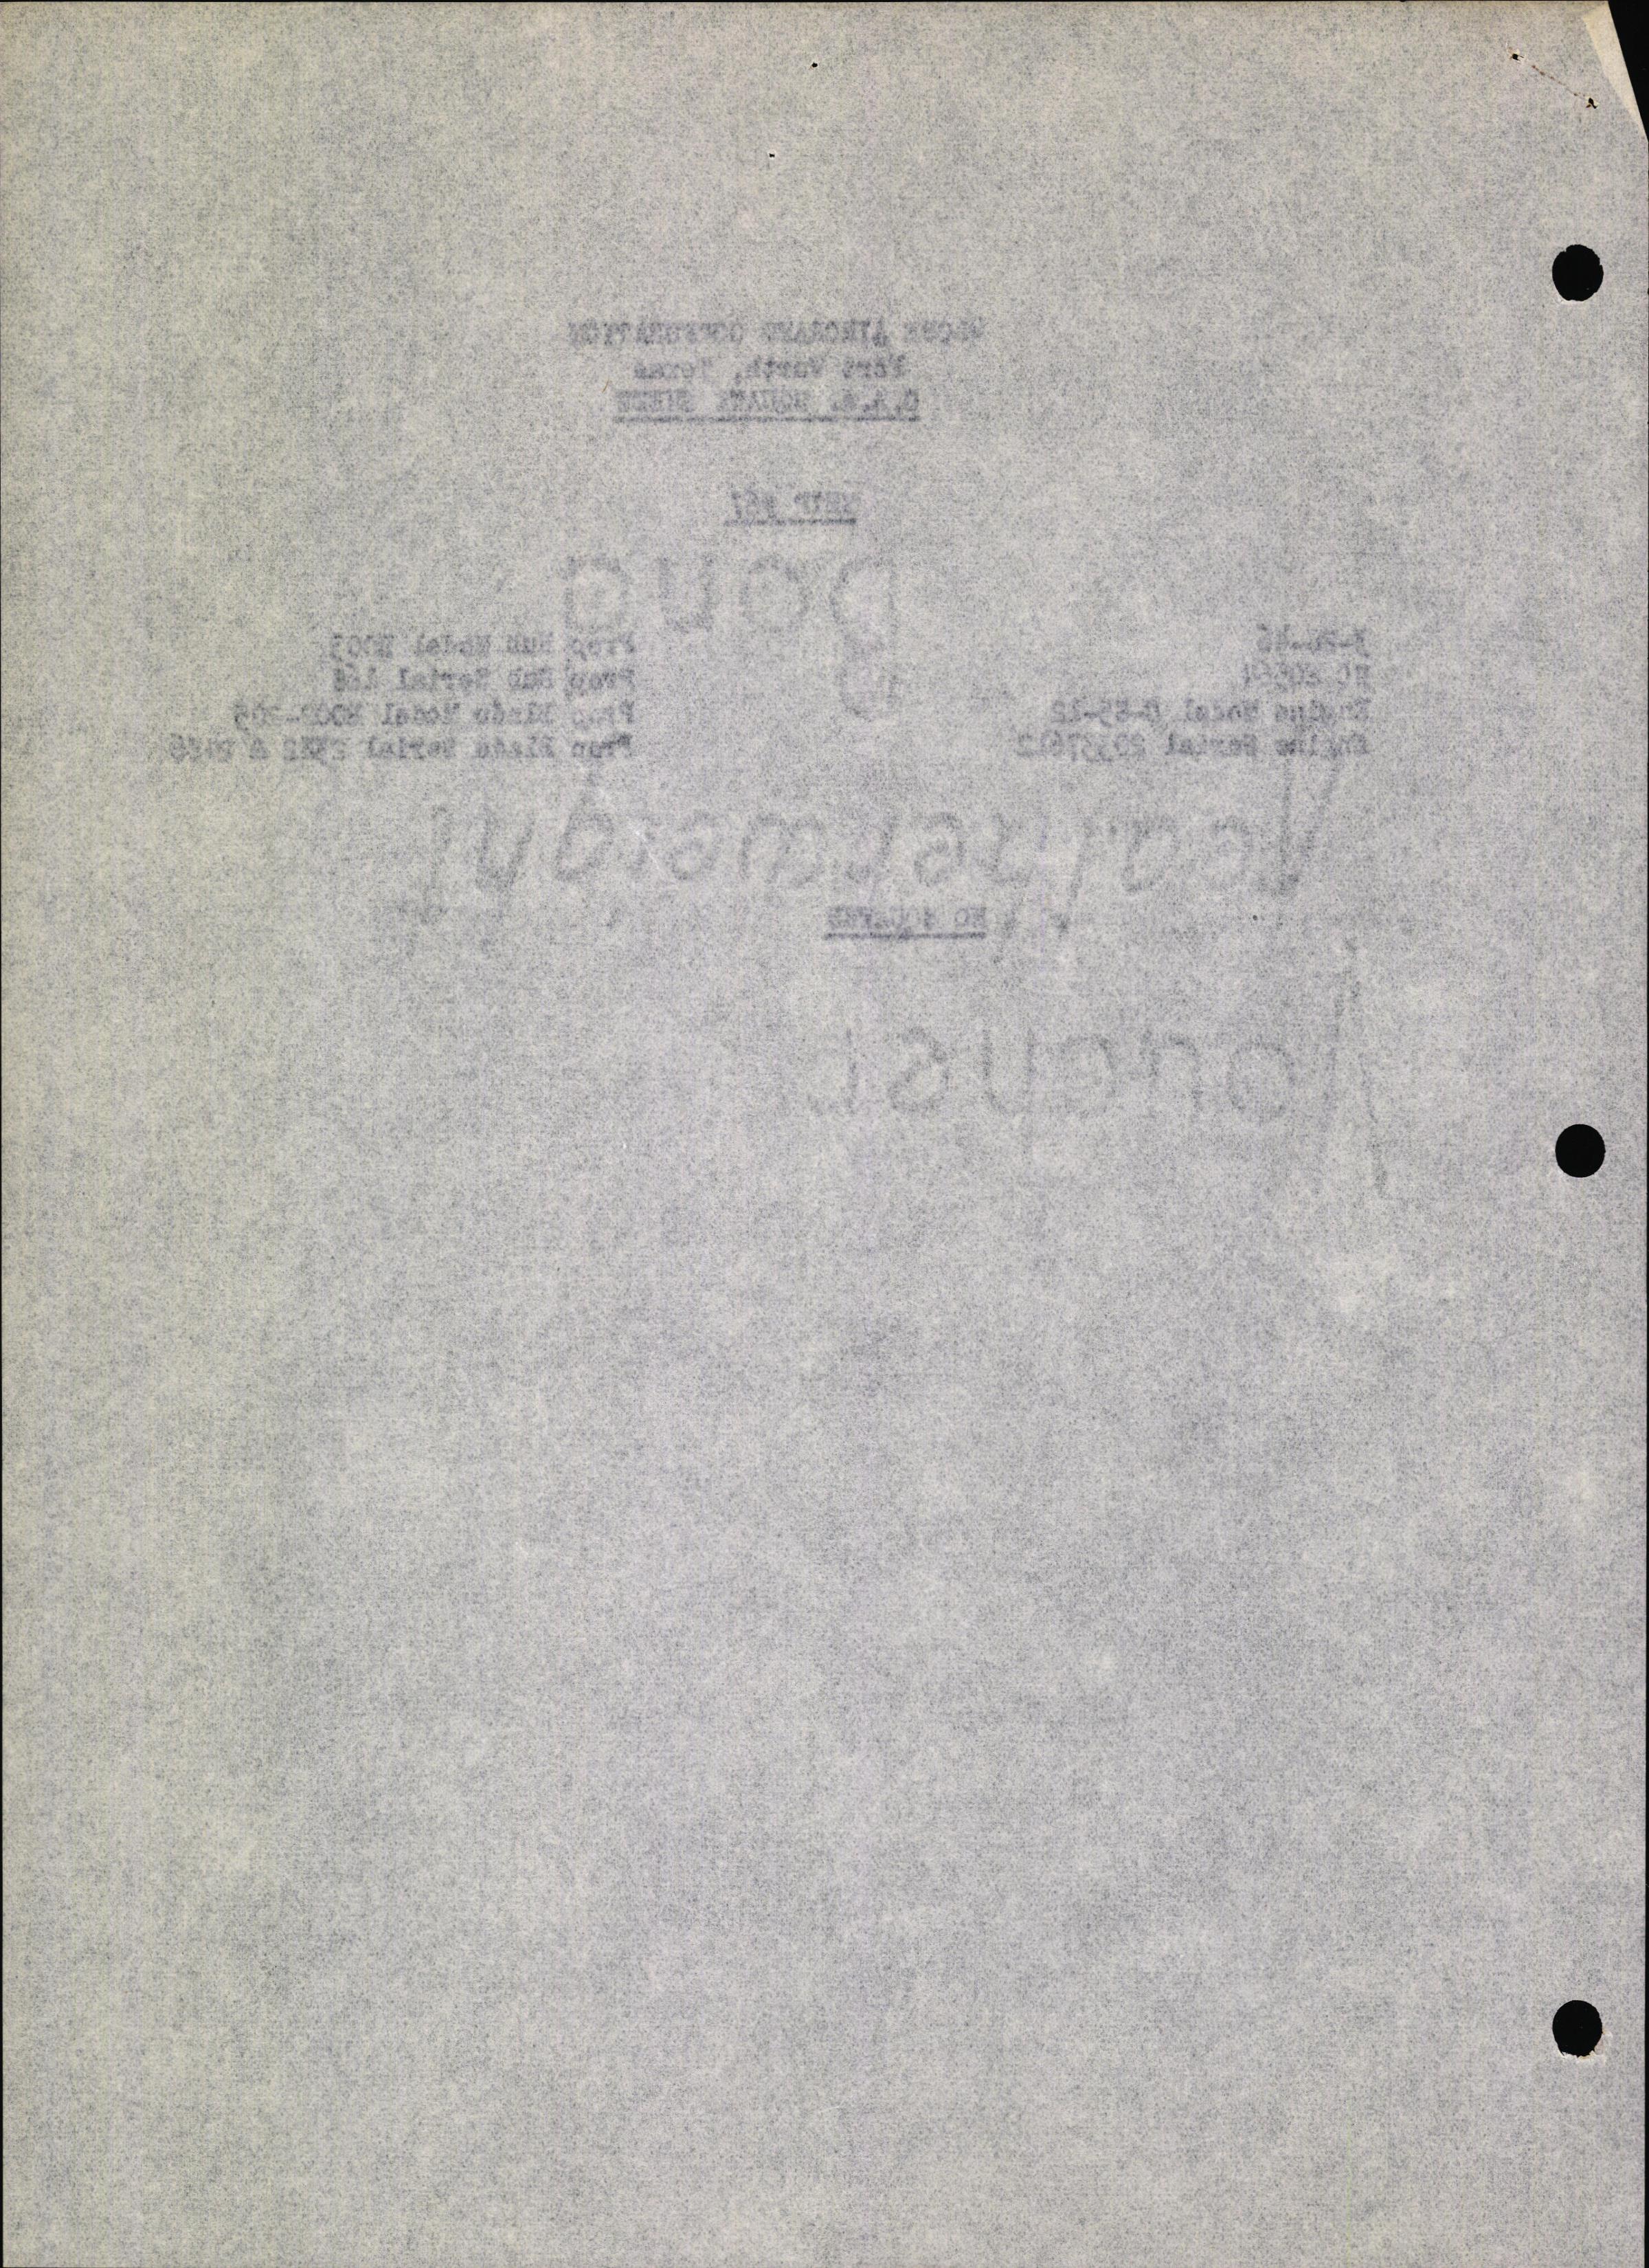 Sample page 8 from AirCorps Library document: Technical Information for Serial Number 67